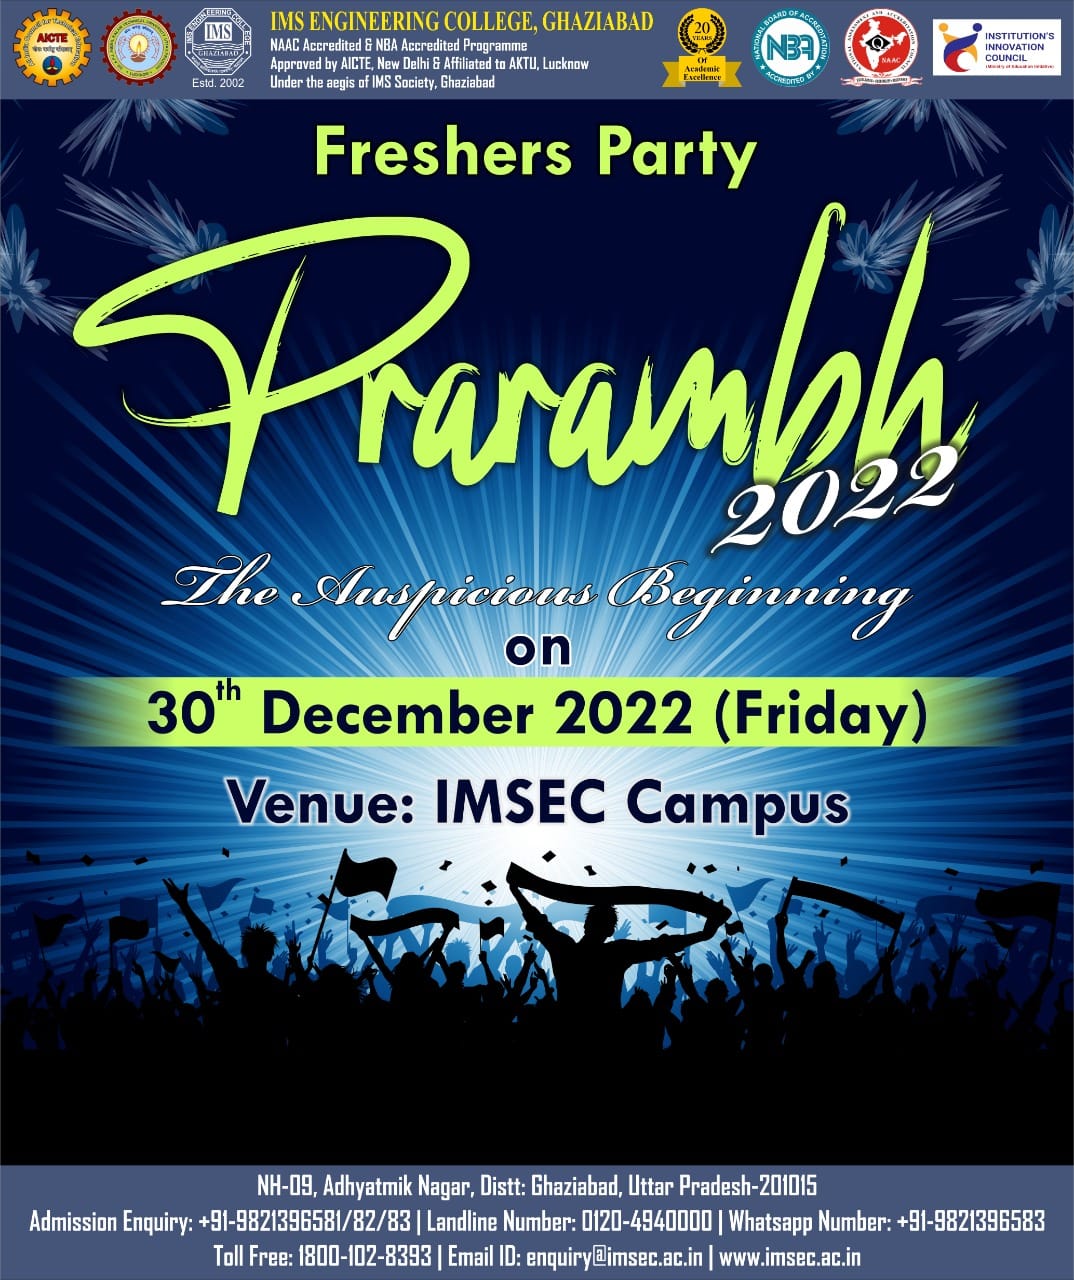 Fresher Party at IMS Engineering College 